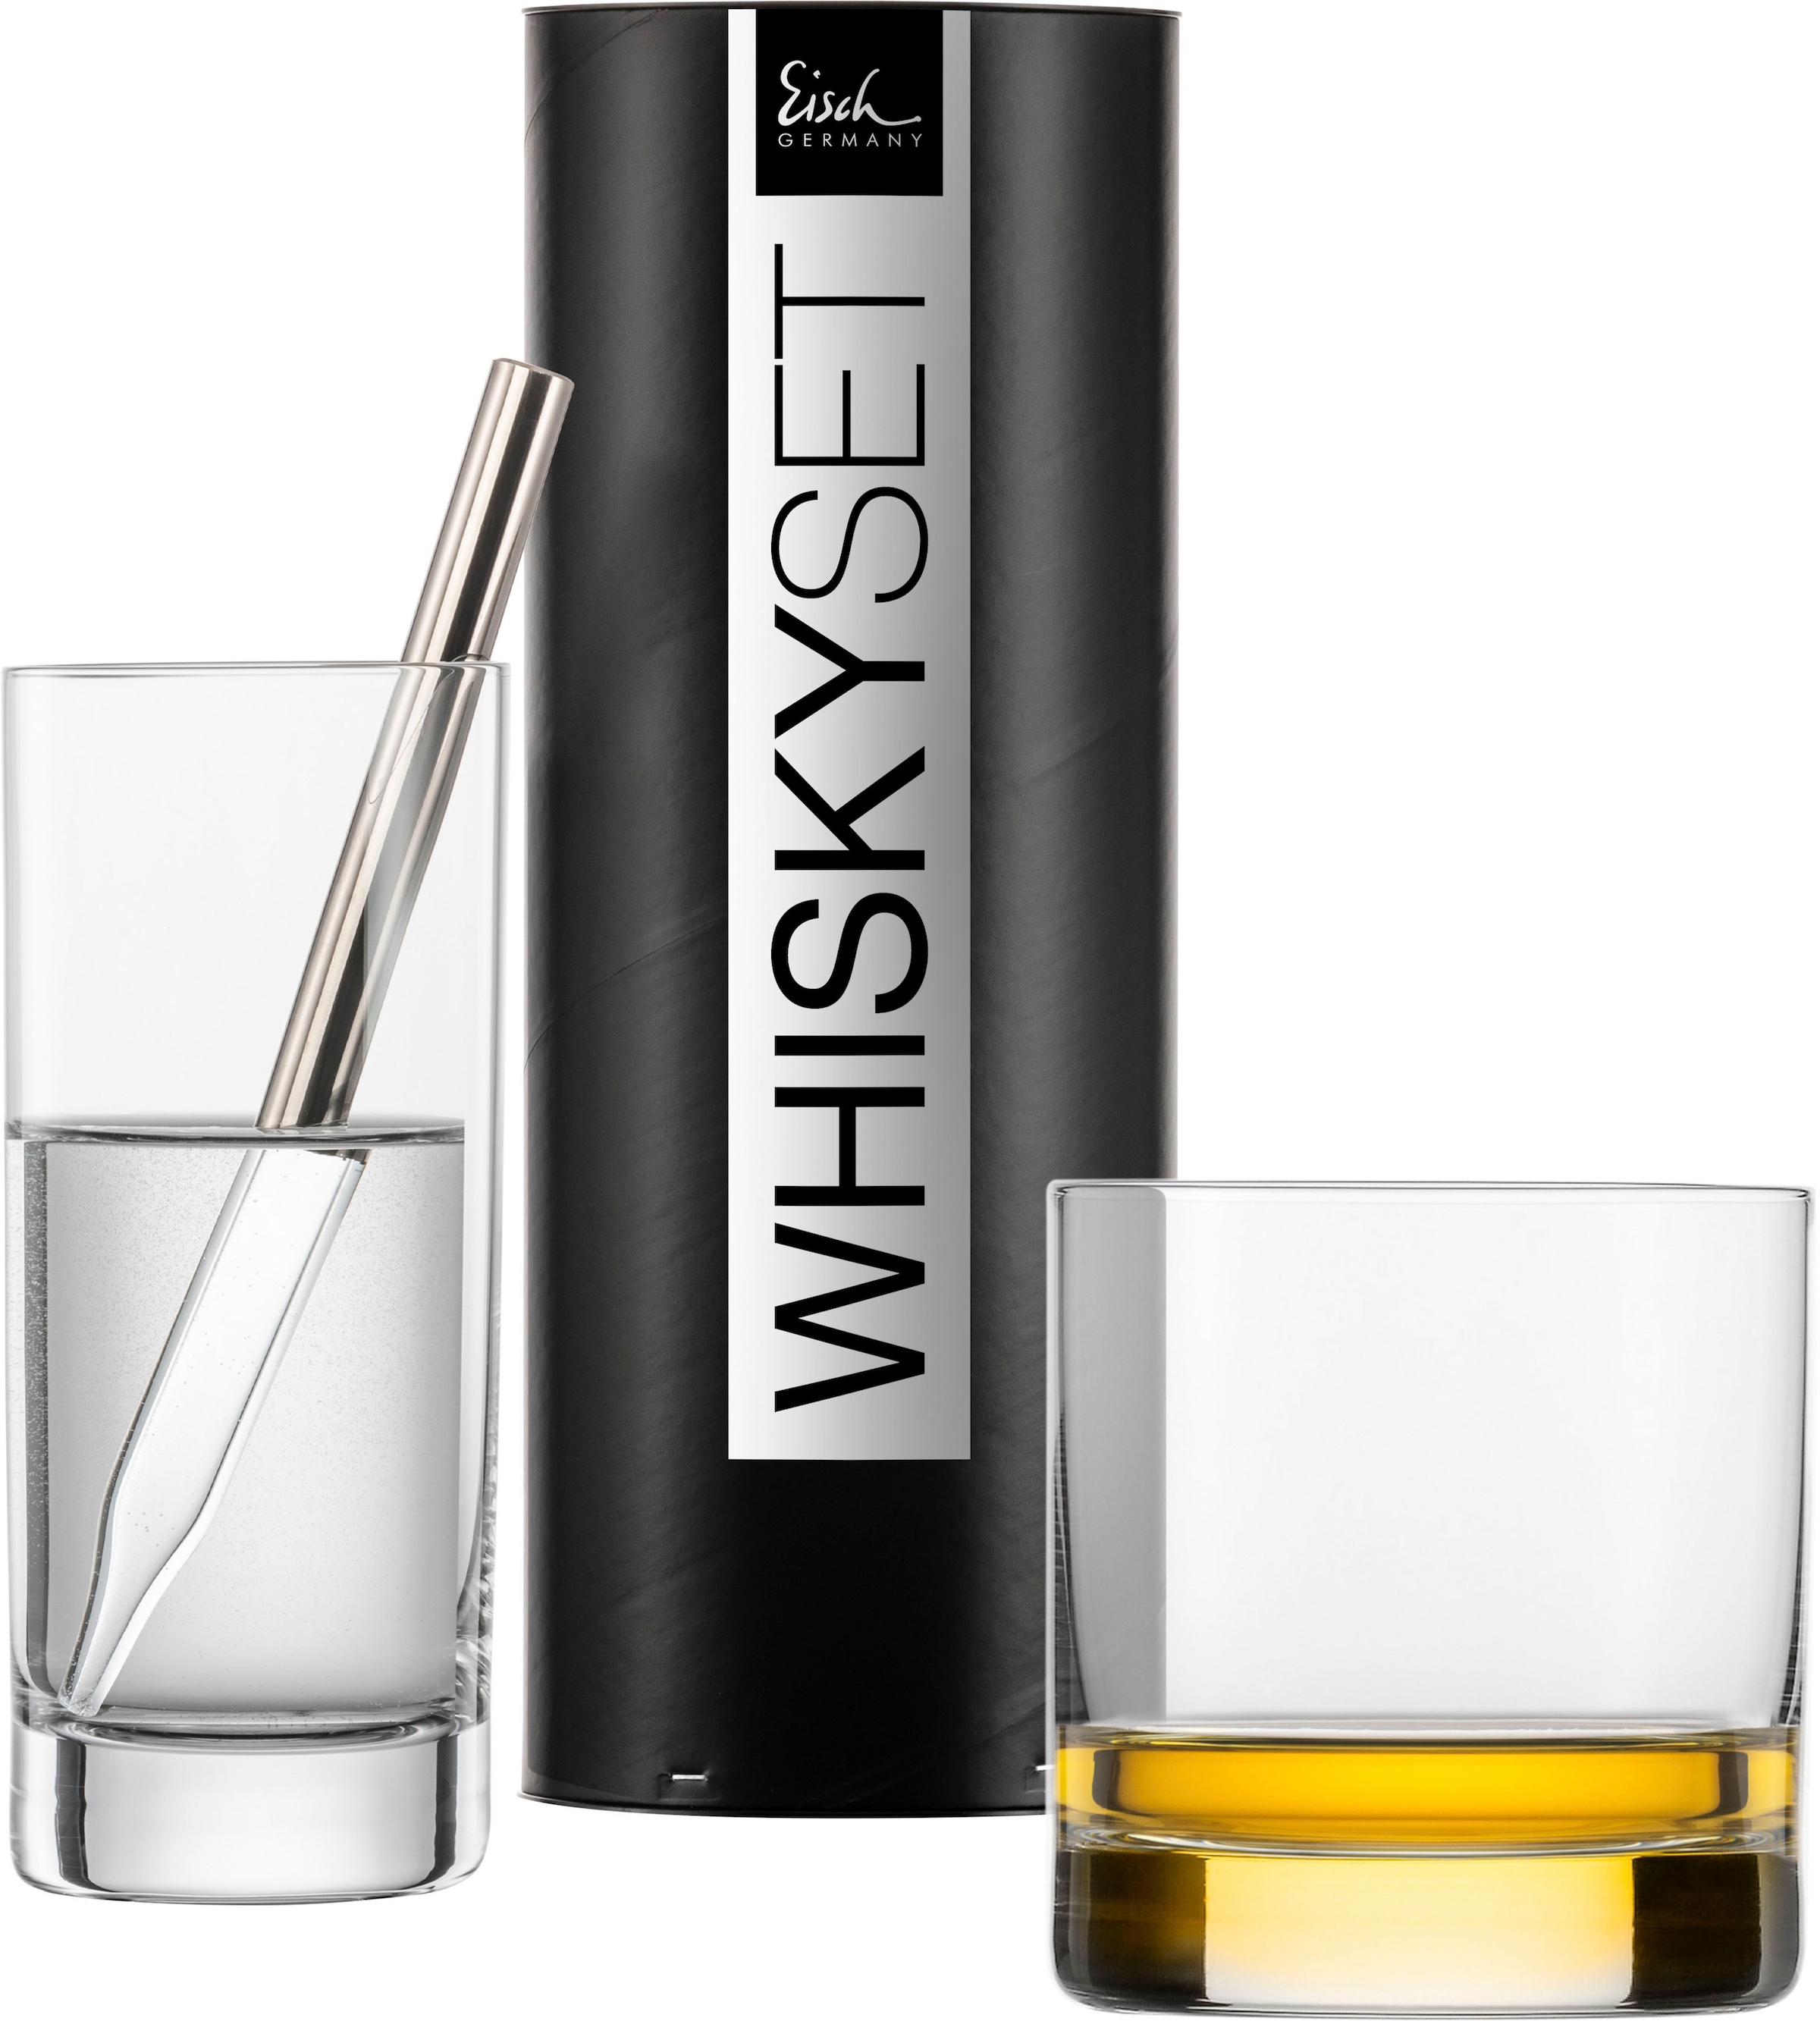 Whiskyglas »GENTLEMAN, Made in Germany«, (Set, 3 tlg., 1 Whisky-Pipette, 1...